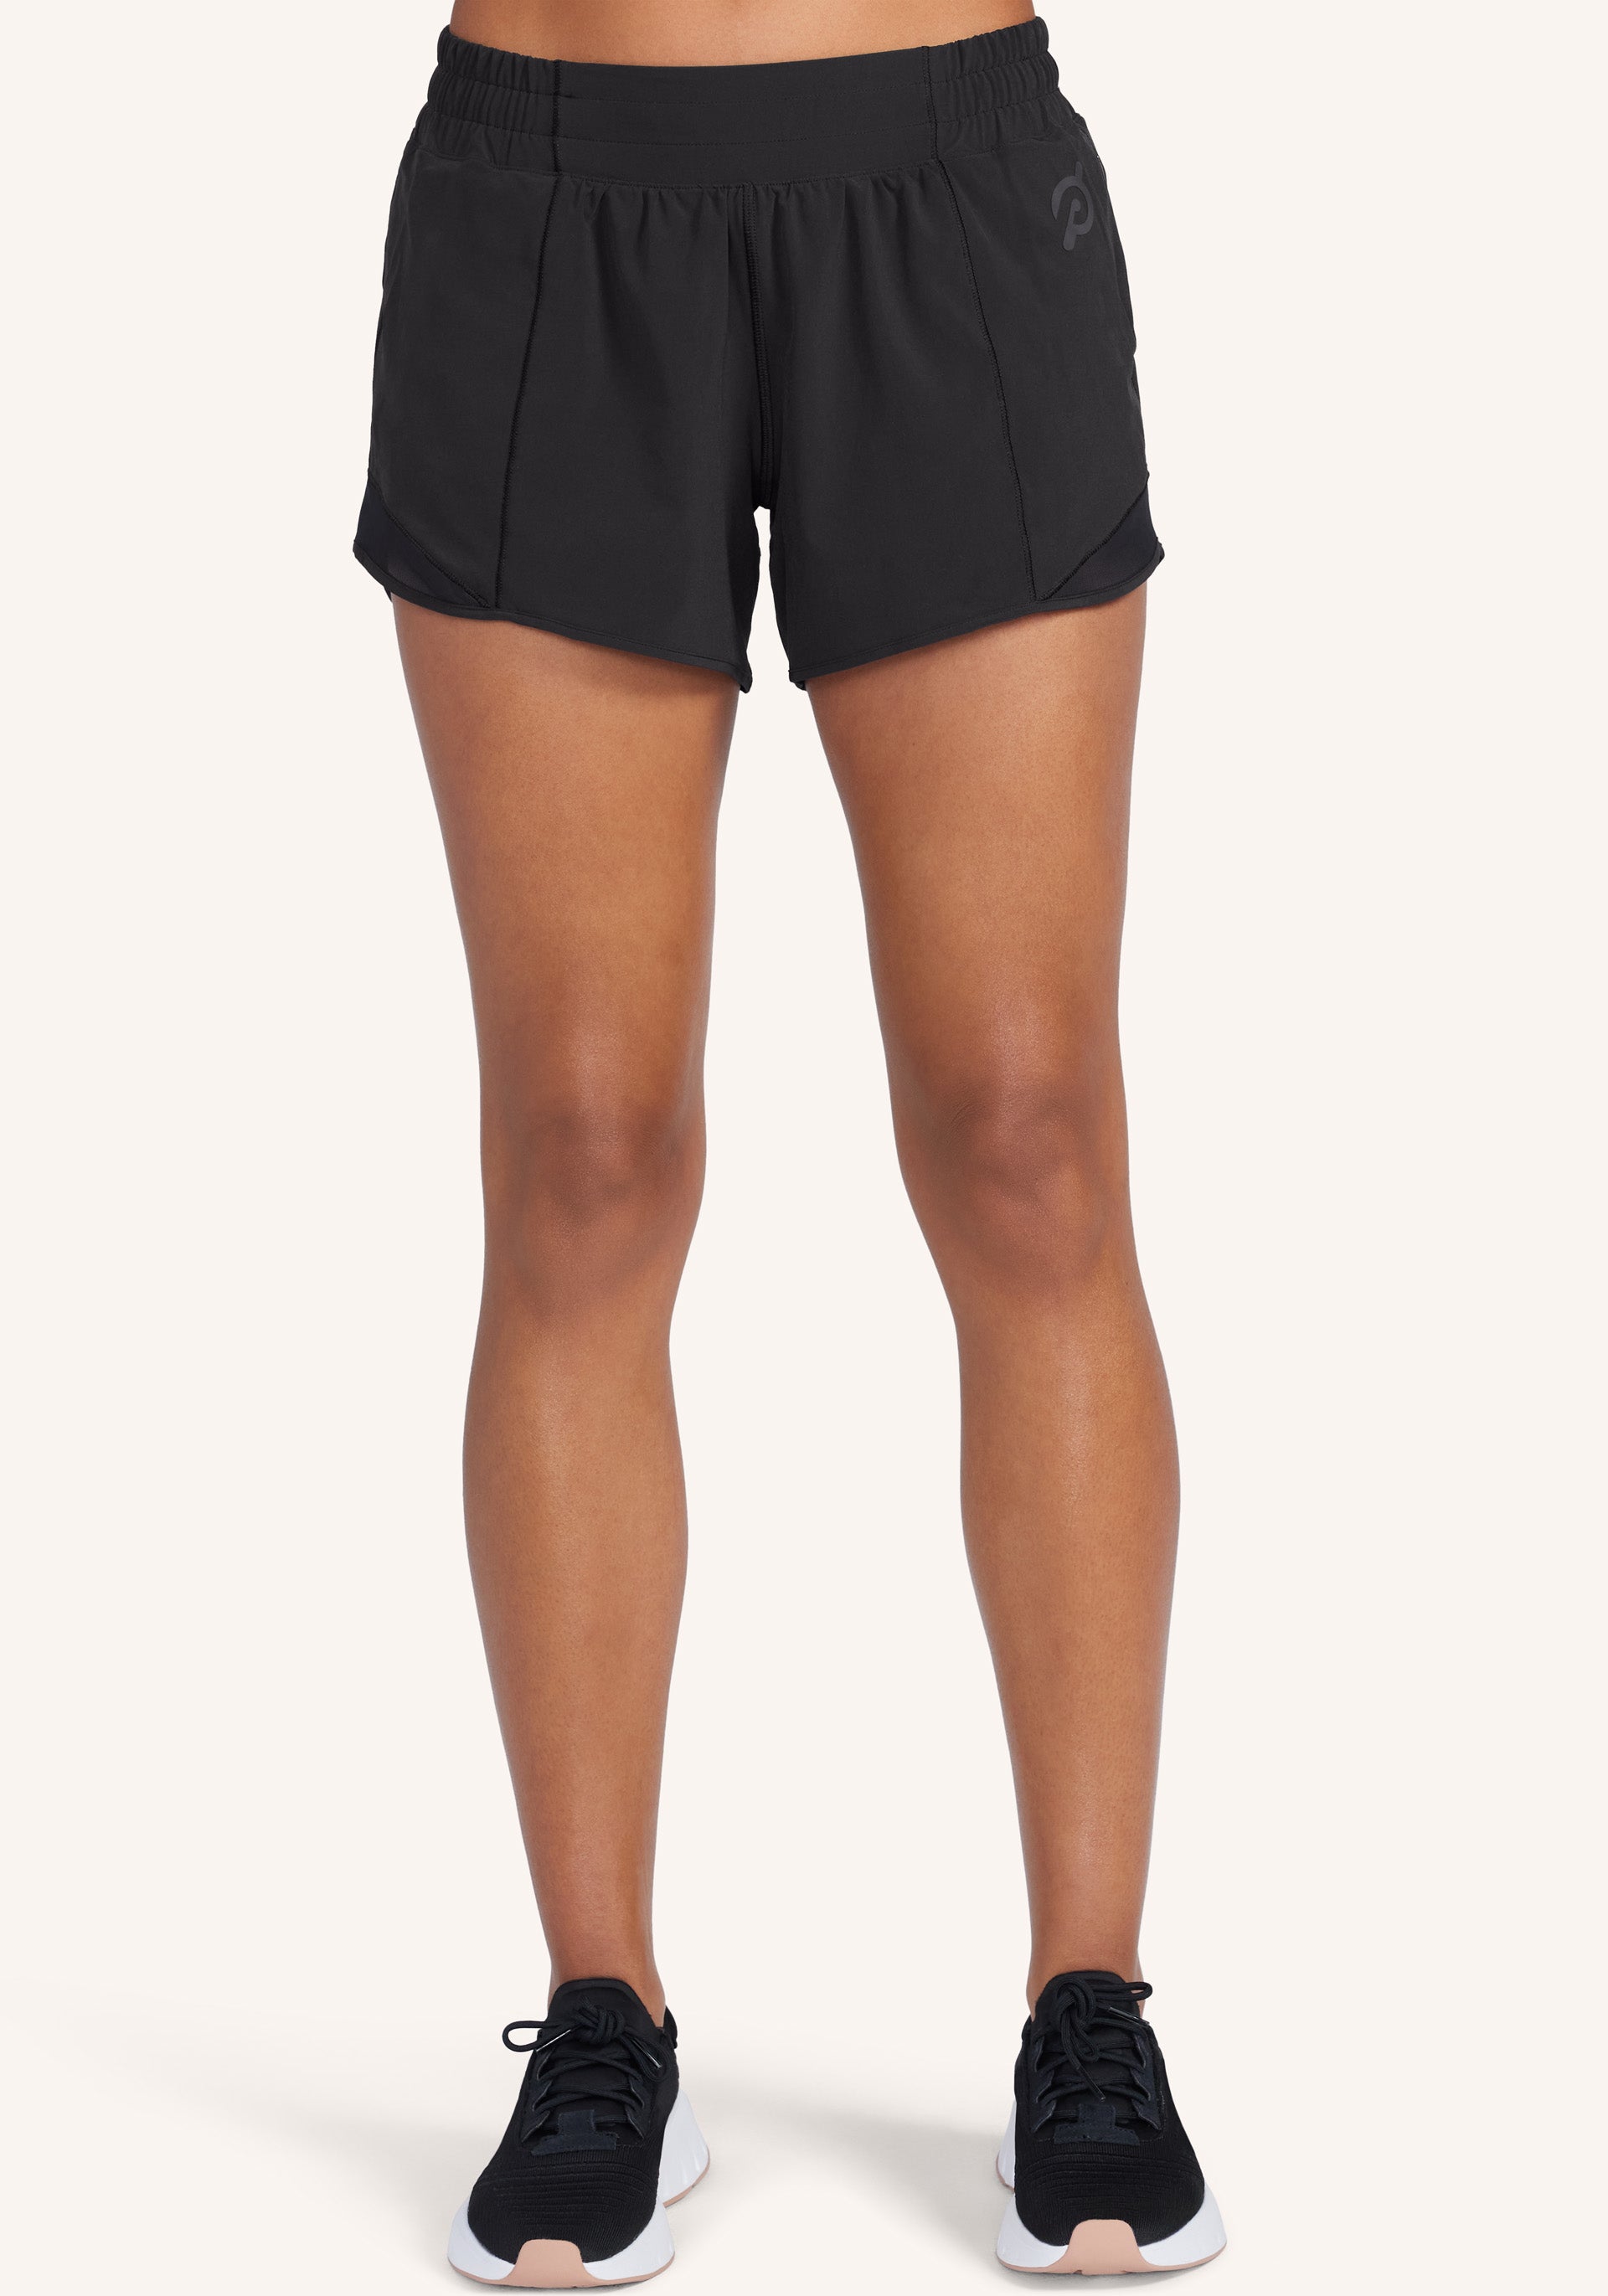 NWT Lululemon Peloton Soleil Hotty Hot Shorts-8 Tall, 4” Yellow sold-out